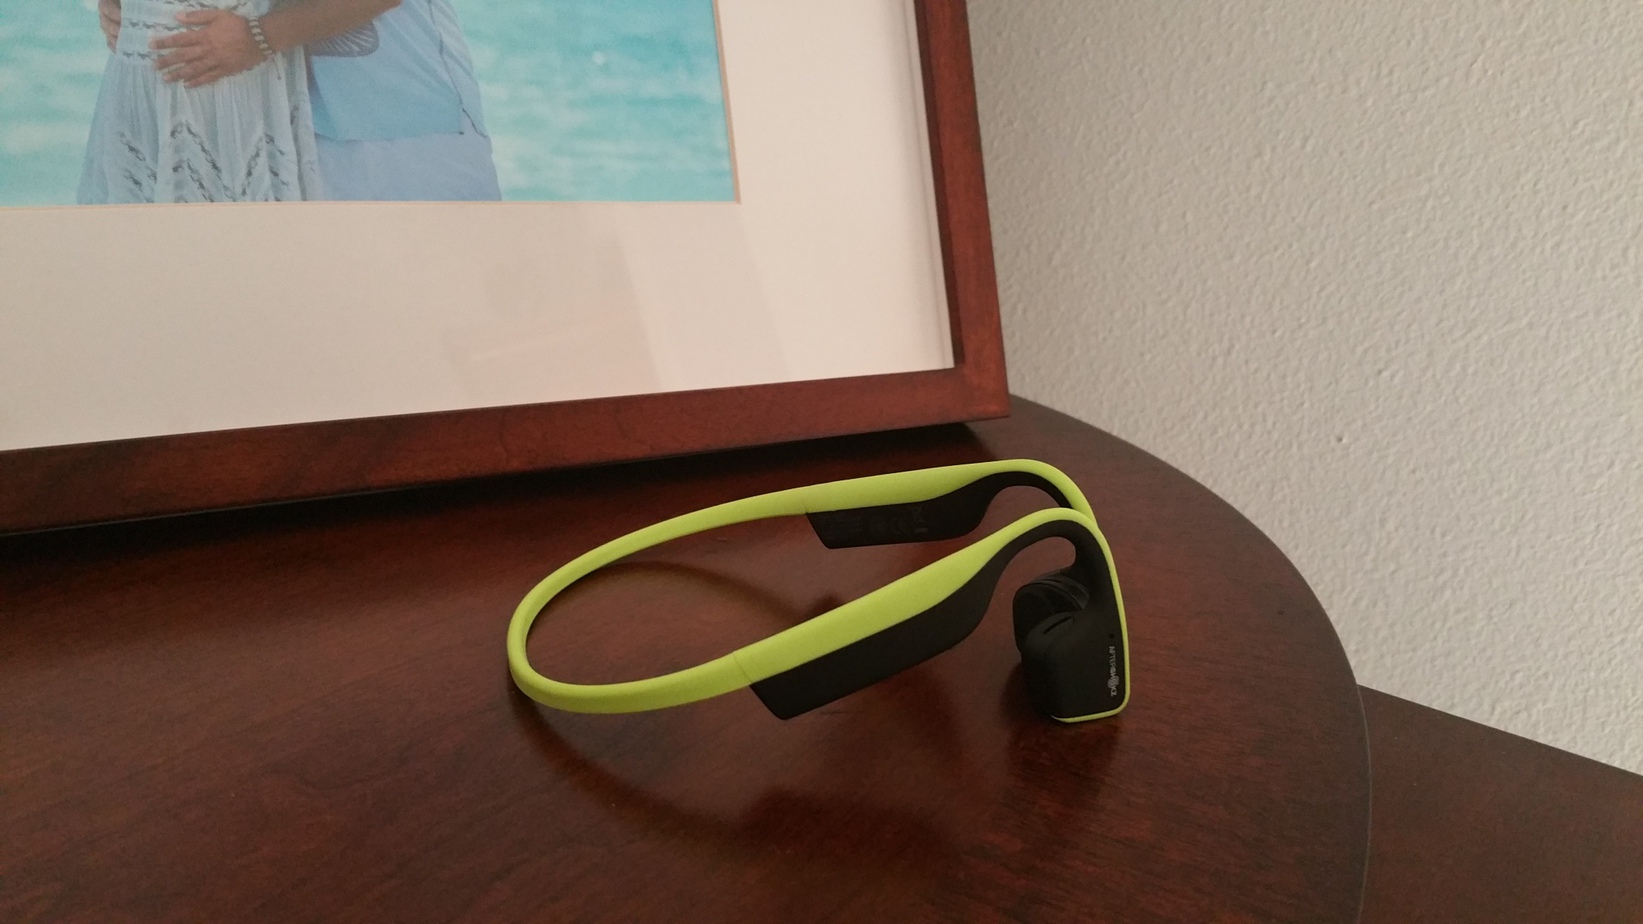 There are benefits of bone conduction headphones but it is good to know if they are safe and how they actually work so you can decide if they are right for you.